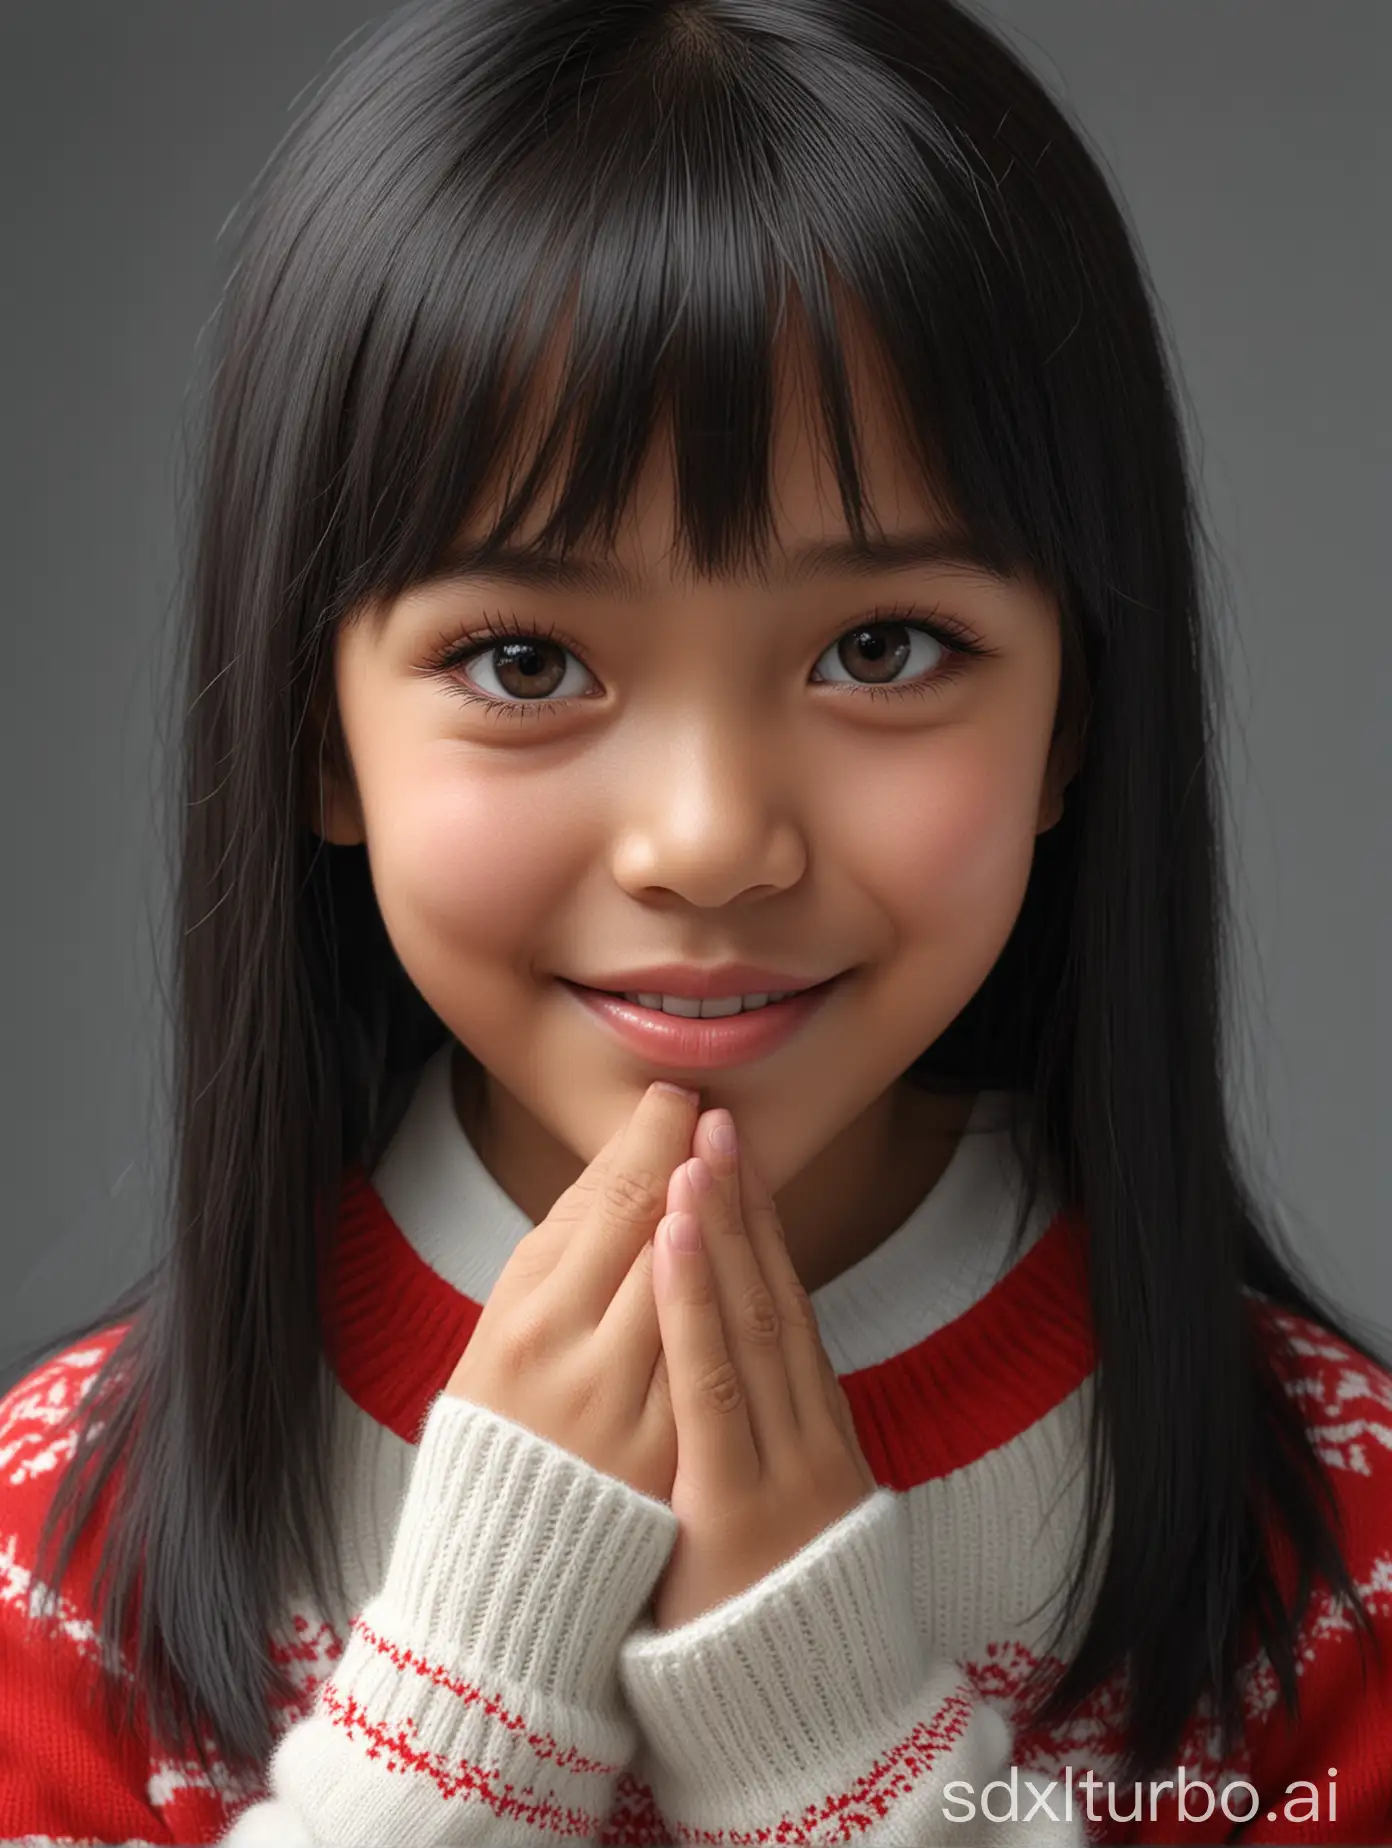 hyper-realistic, make a little Indonesian girl smile and cute, 7yo, long black straight bangs, wearing a red and white sweater, touching her cheek, real photo realistic, Photorealistic,  photography,  hyper-realism,  8k,  perfect,  sharp, photogenius, facing the camera.